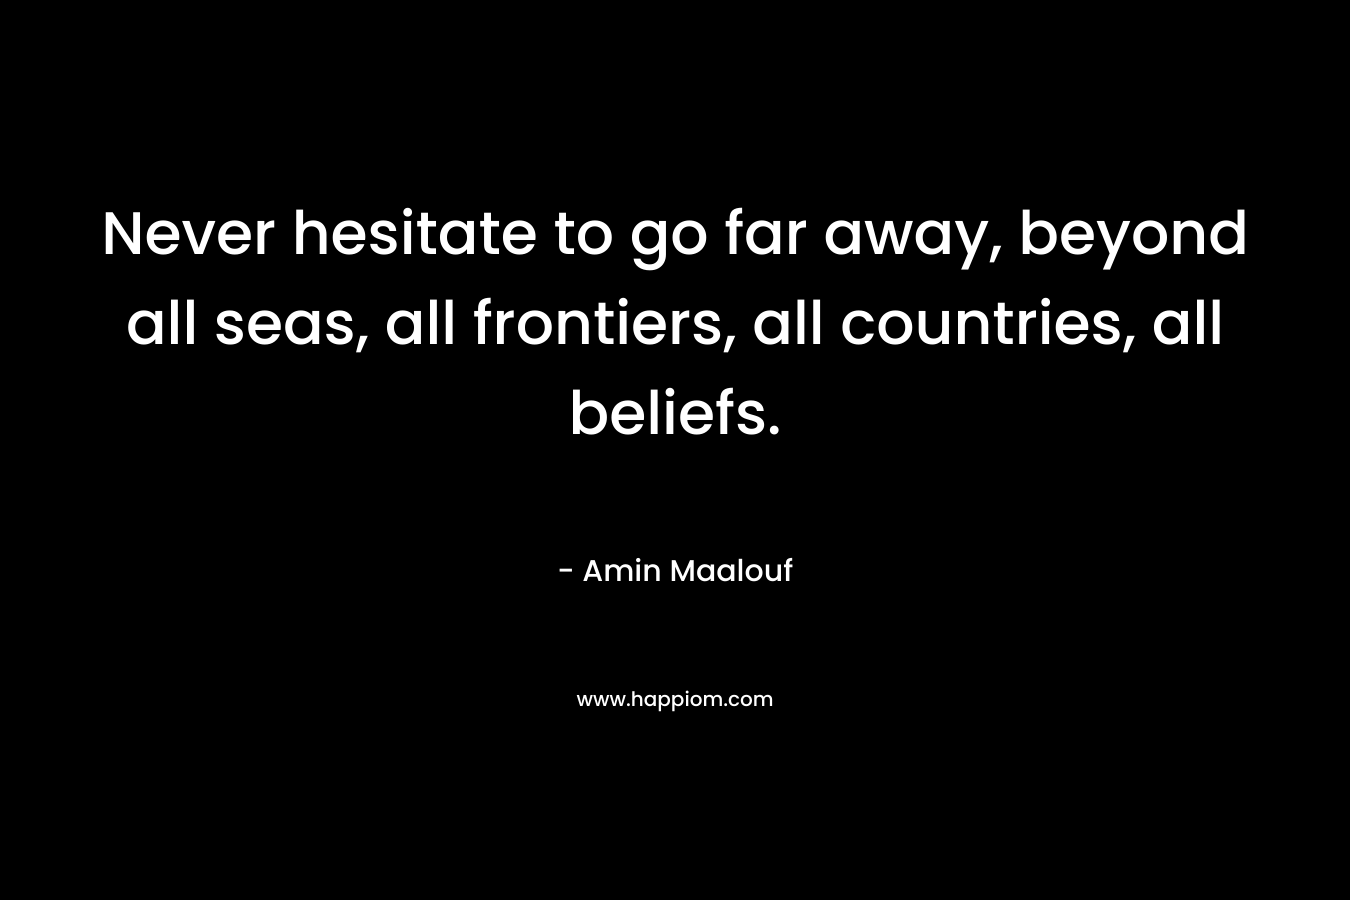 Never hesitate to go far away, beyond all seas, all frontiers, all countries, all beliefs. – Amin Maalouf